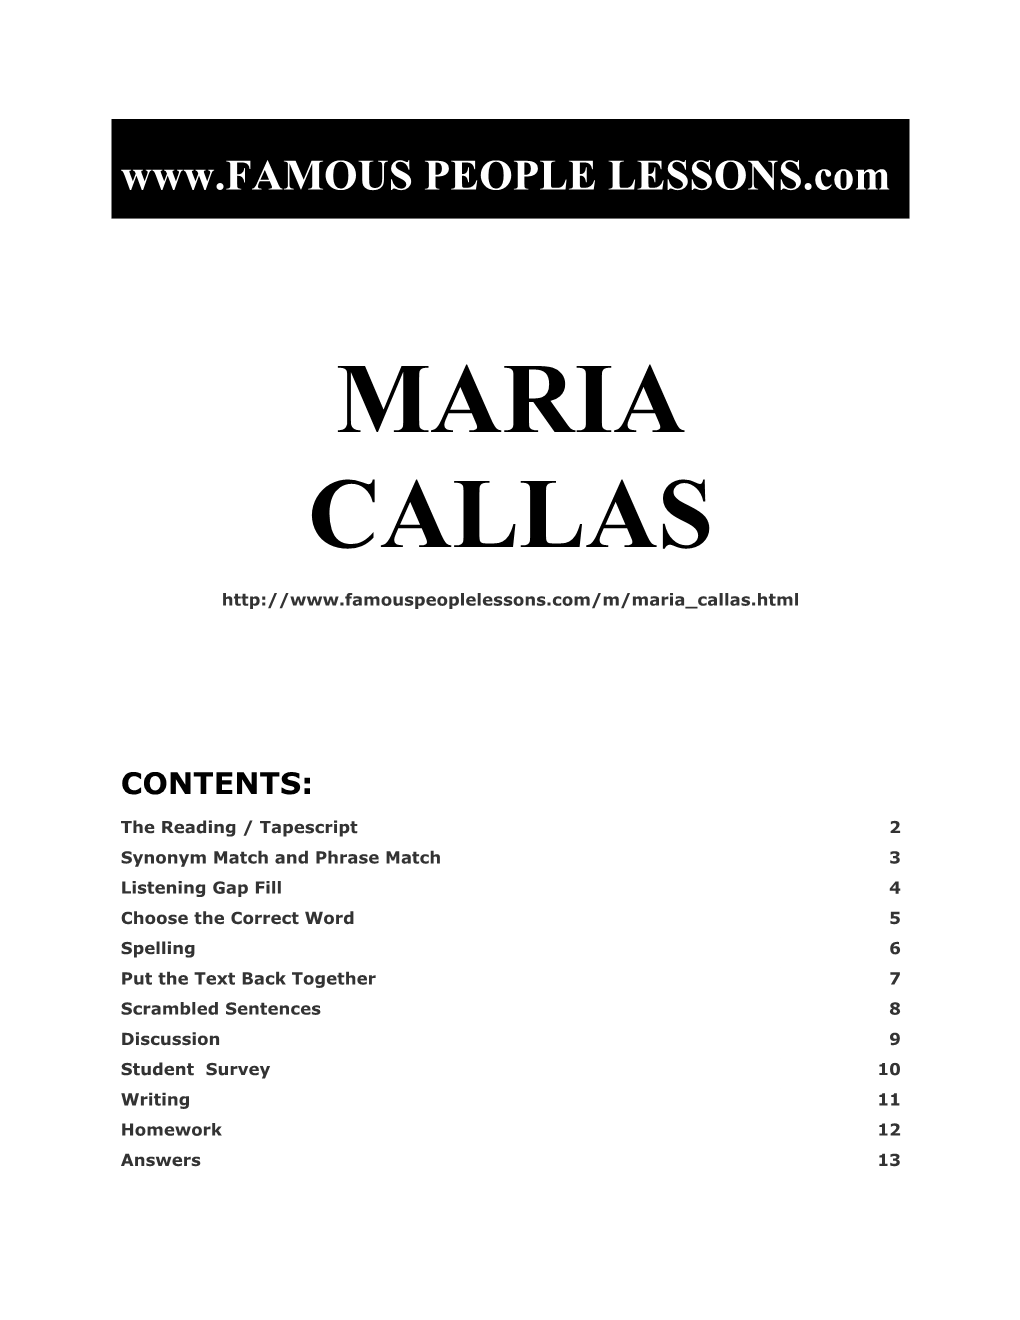 Famous People Lessons - Maria Callas